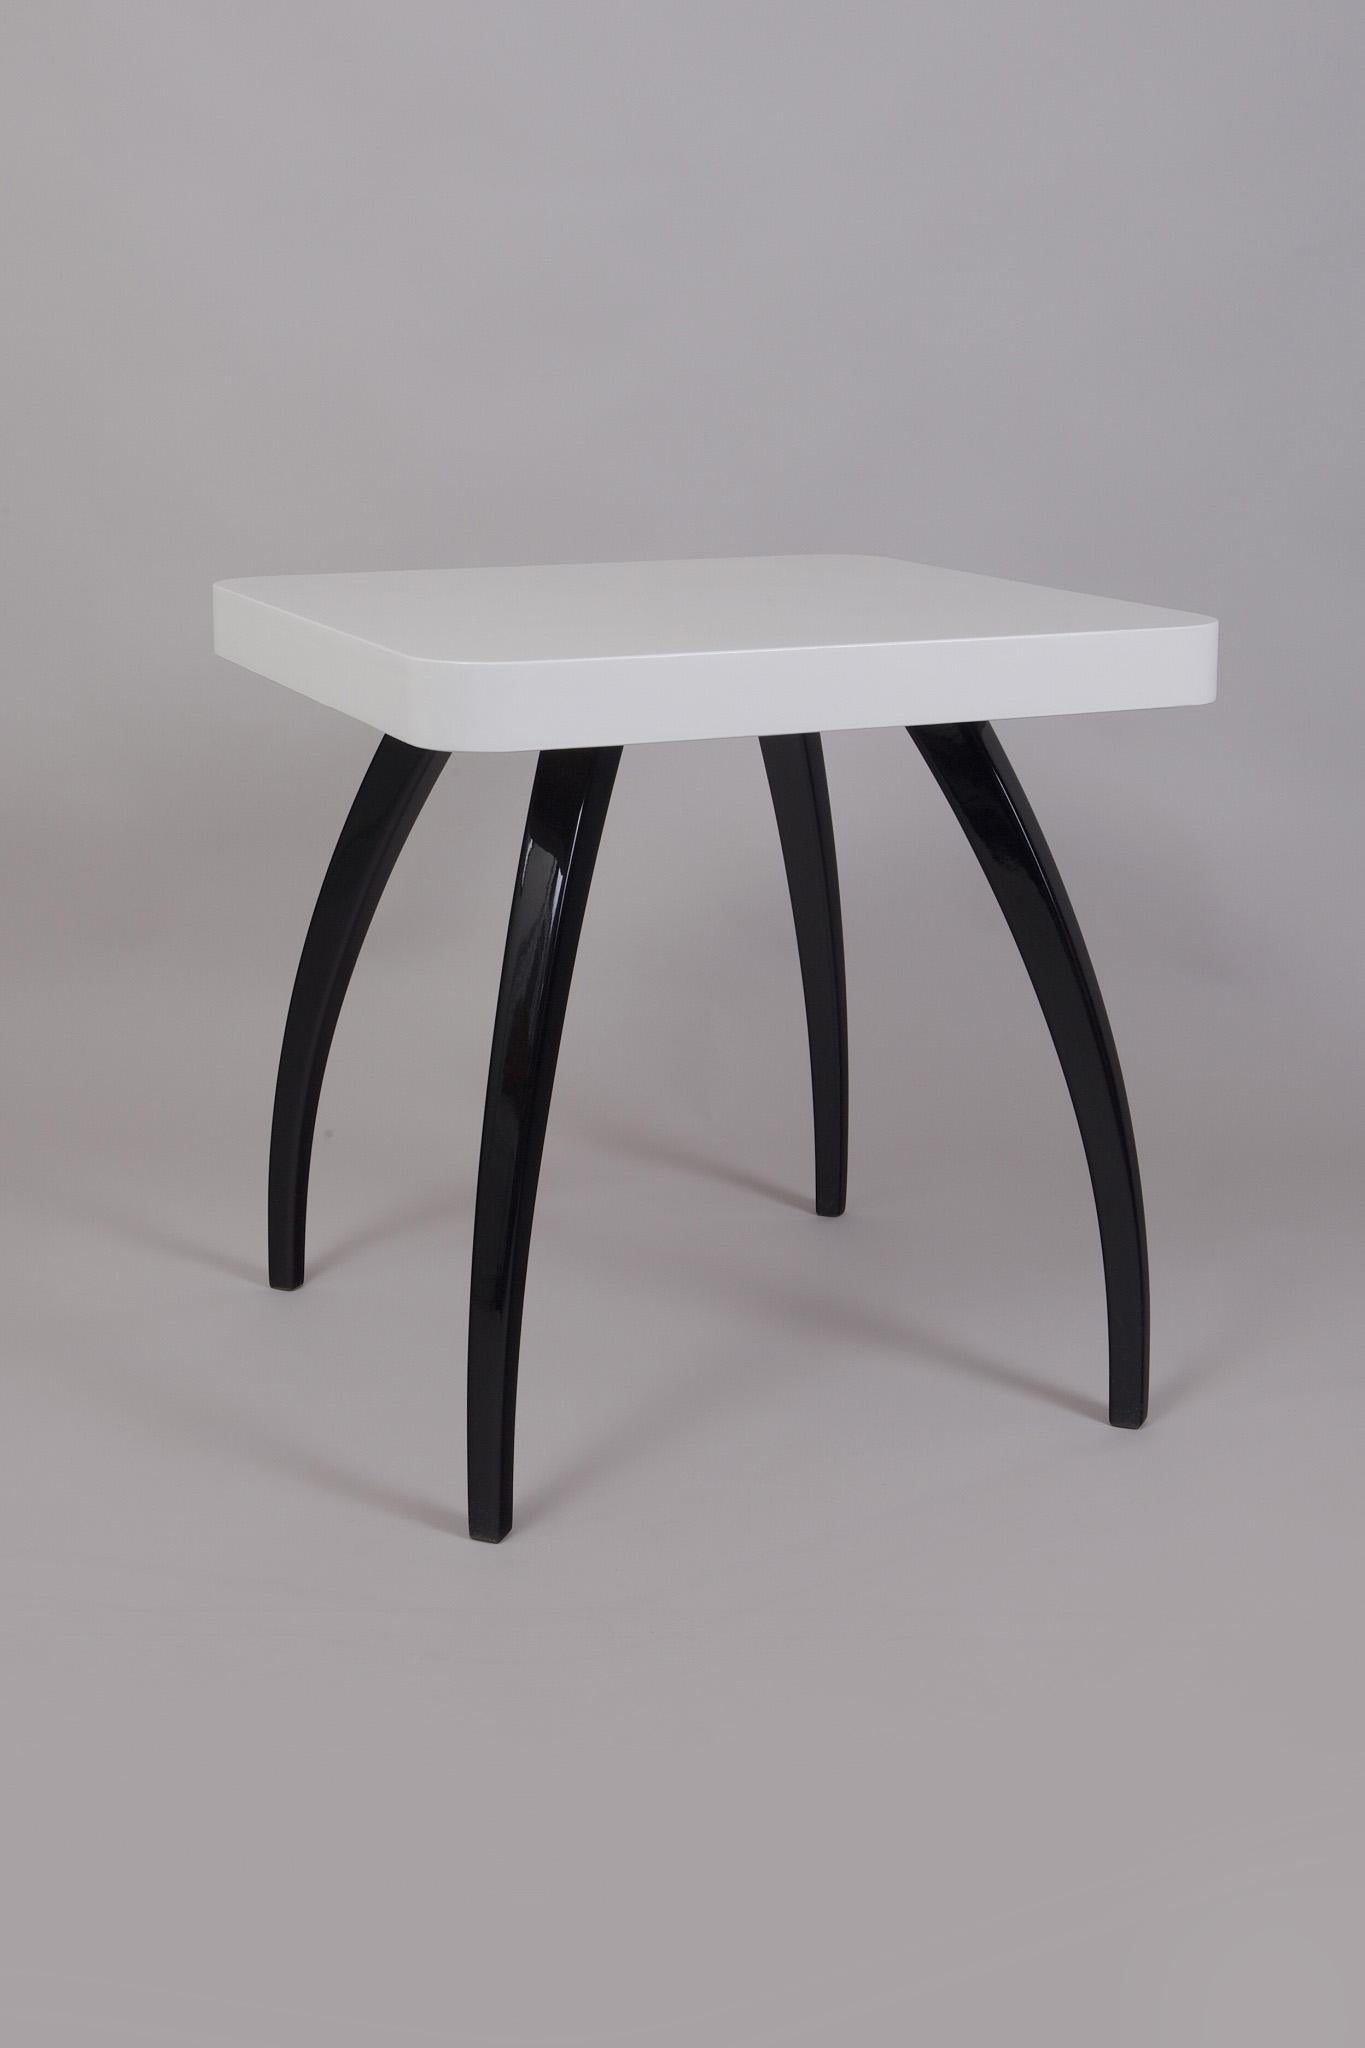 Art Deco Small Black and White Table, Designed by Jindrich Halabala, 1940s Czechia For Sale